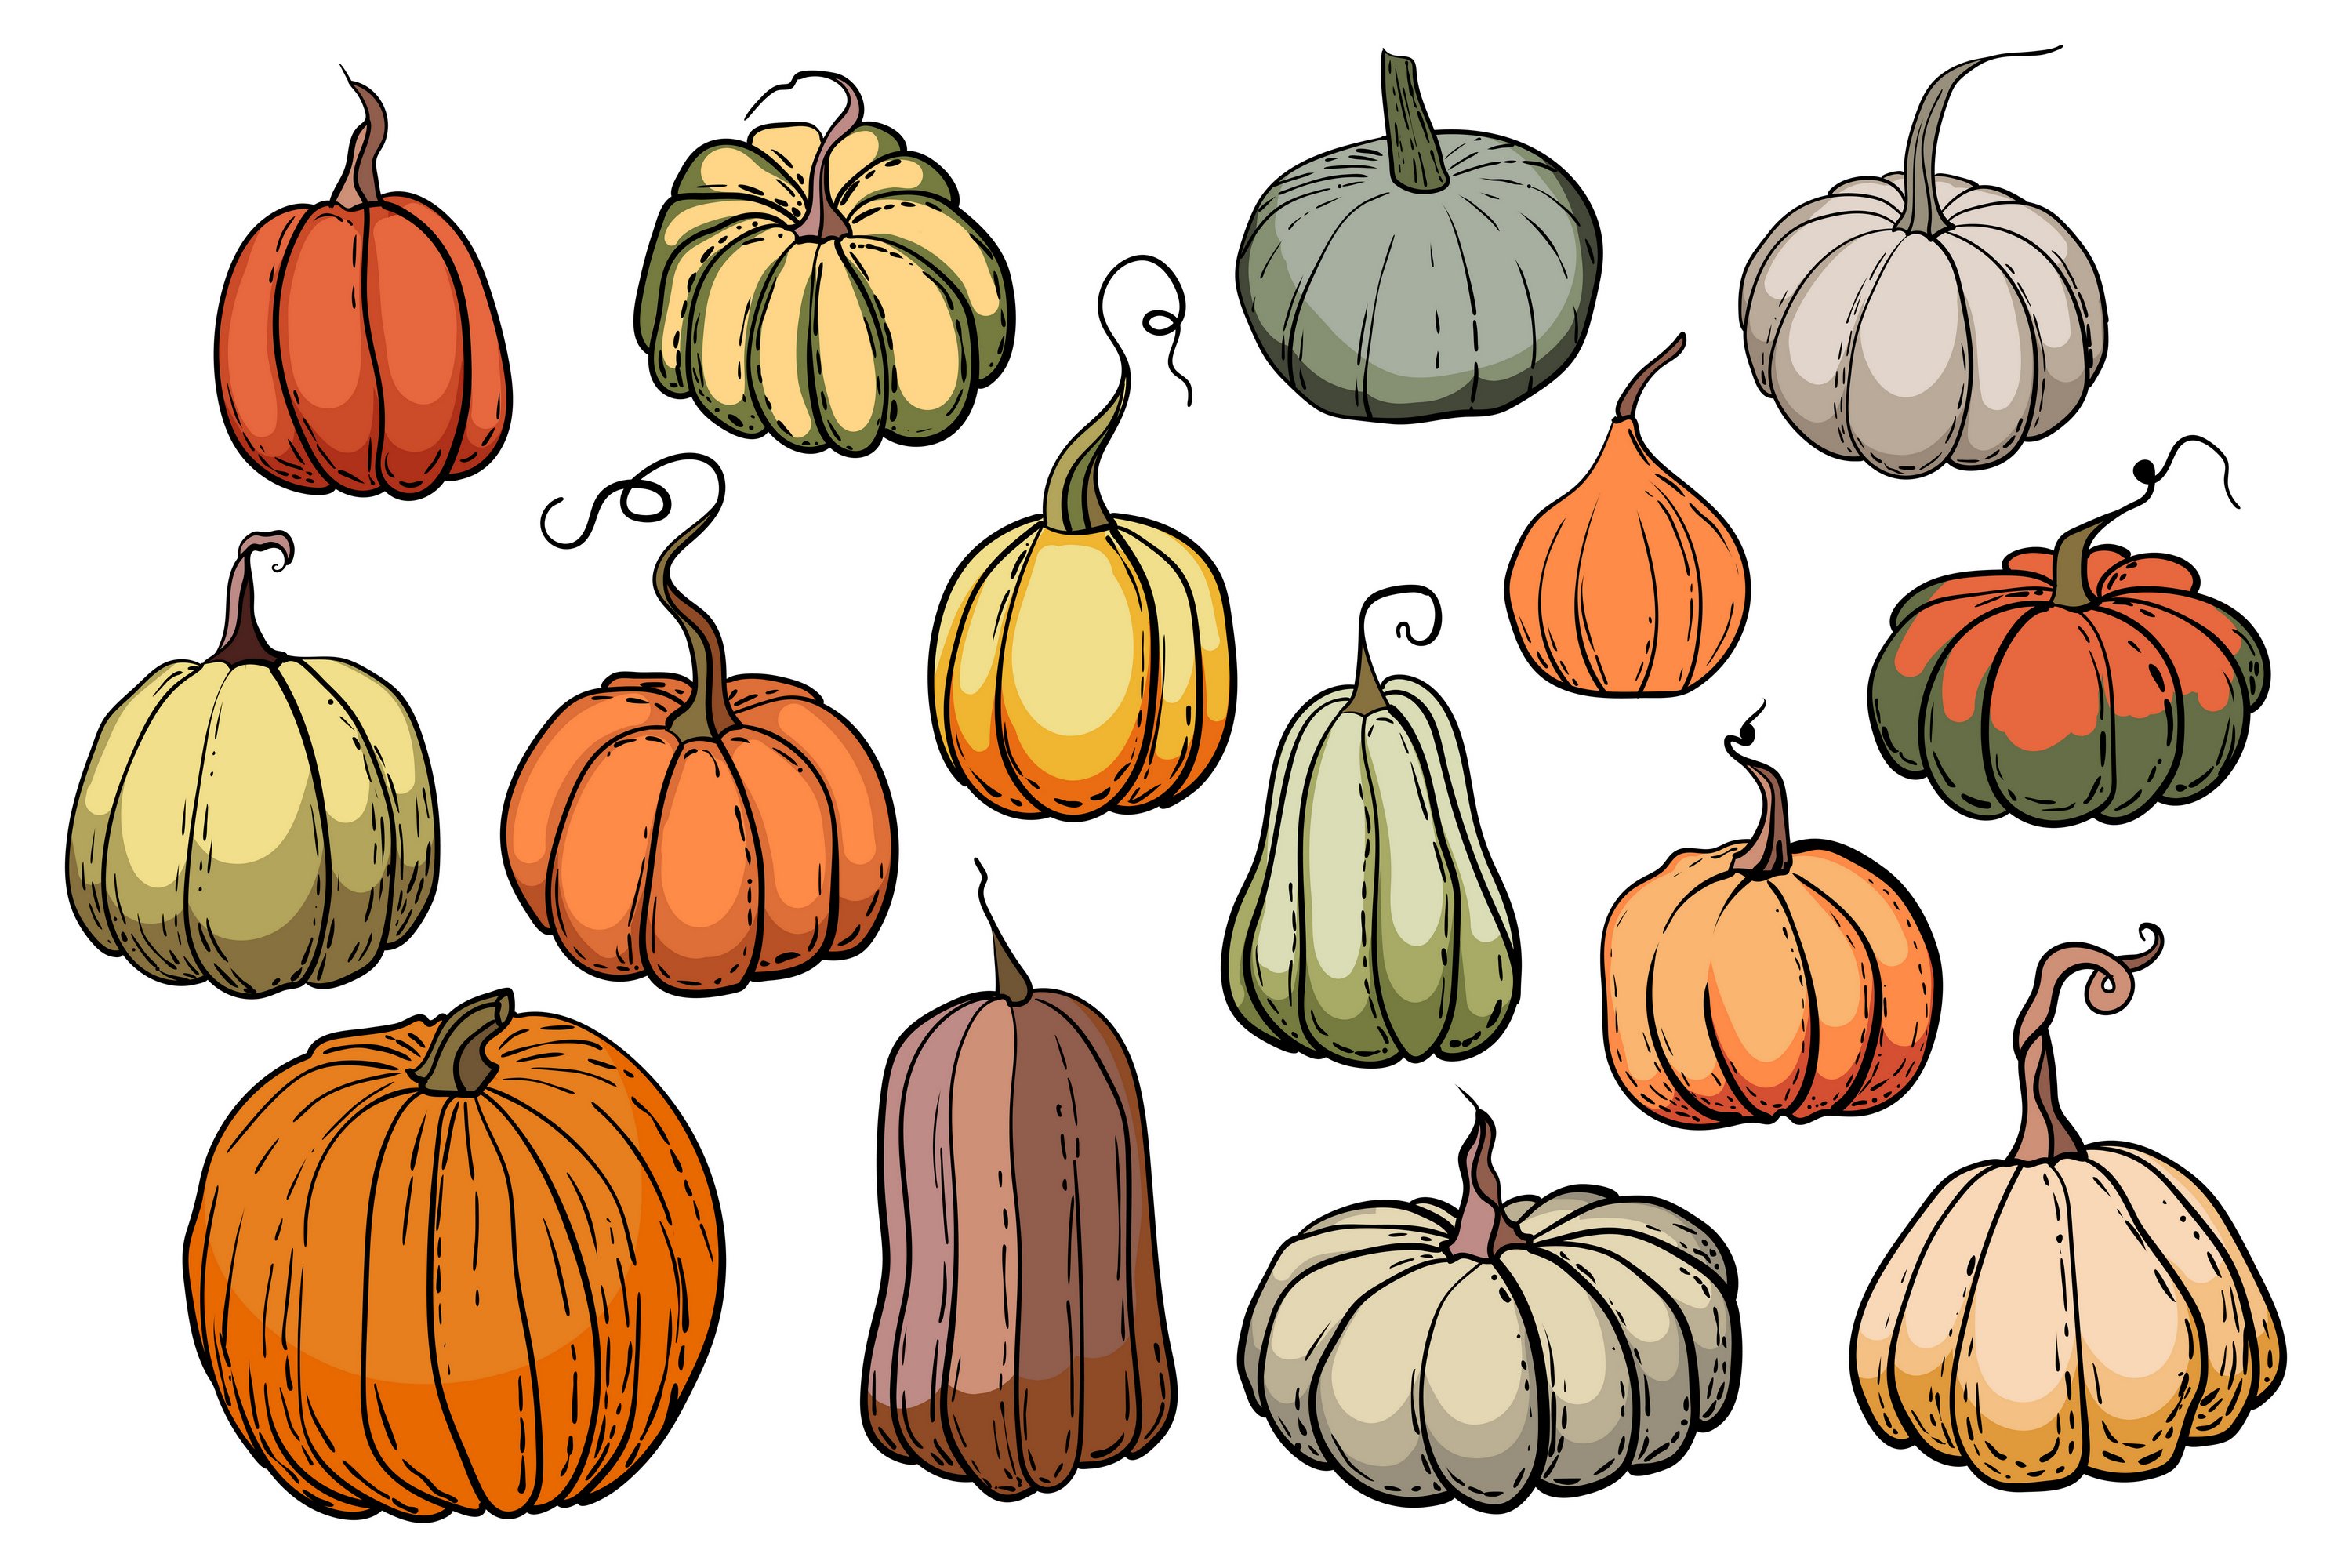 Diverse of pumpkins in a vintage style.